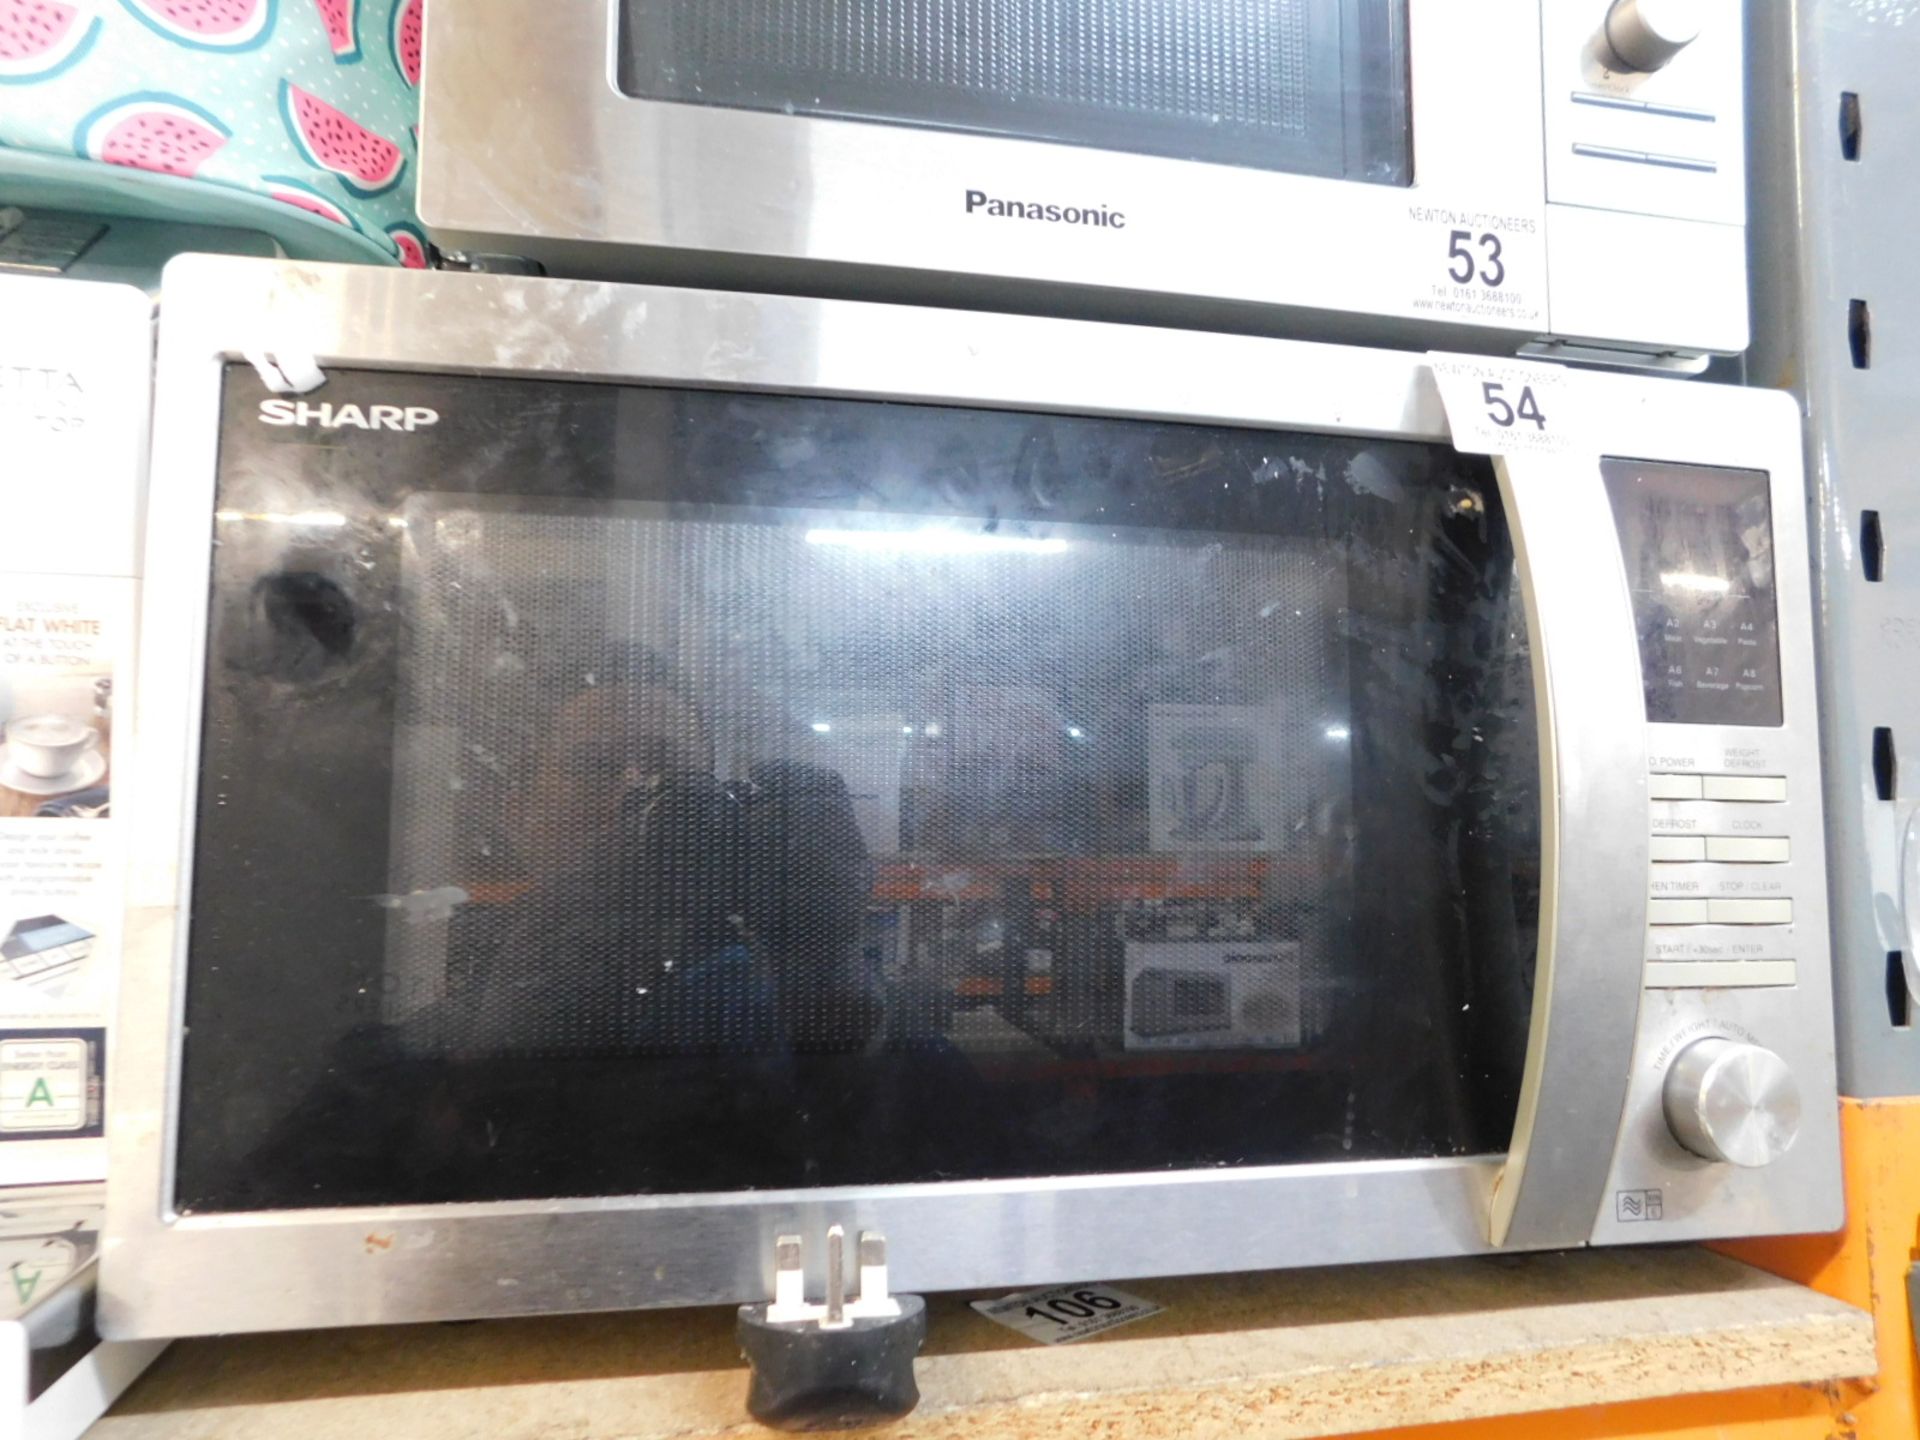 1 SHARP R-28STM 23 LITRE STAINLESS STEEL MICROWAVE OVEN WITH GRILL RACK RRP Â£179.99